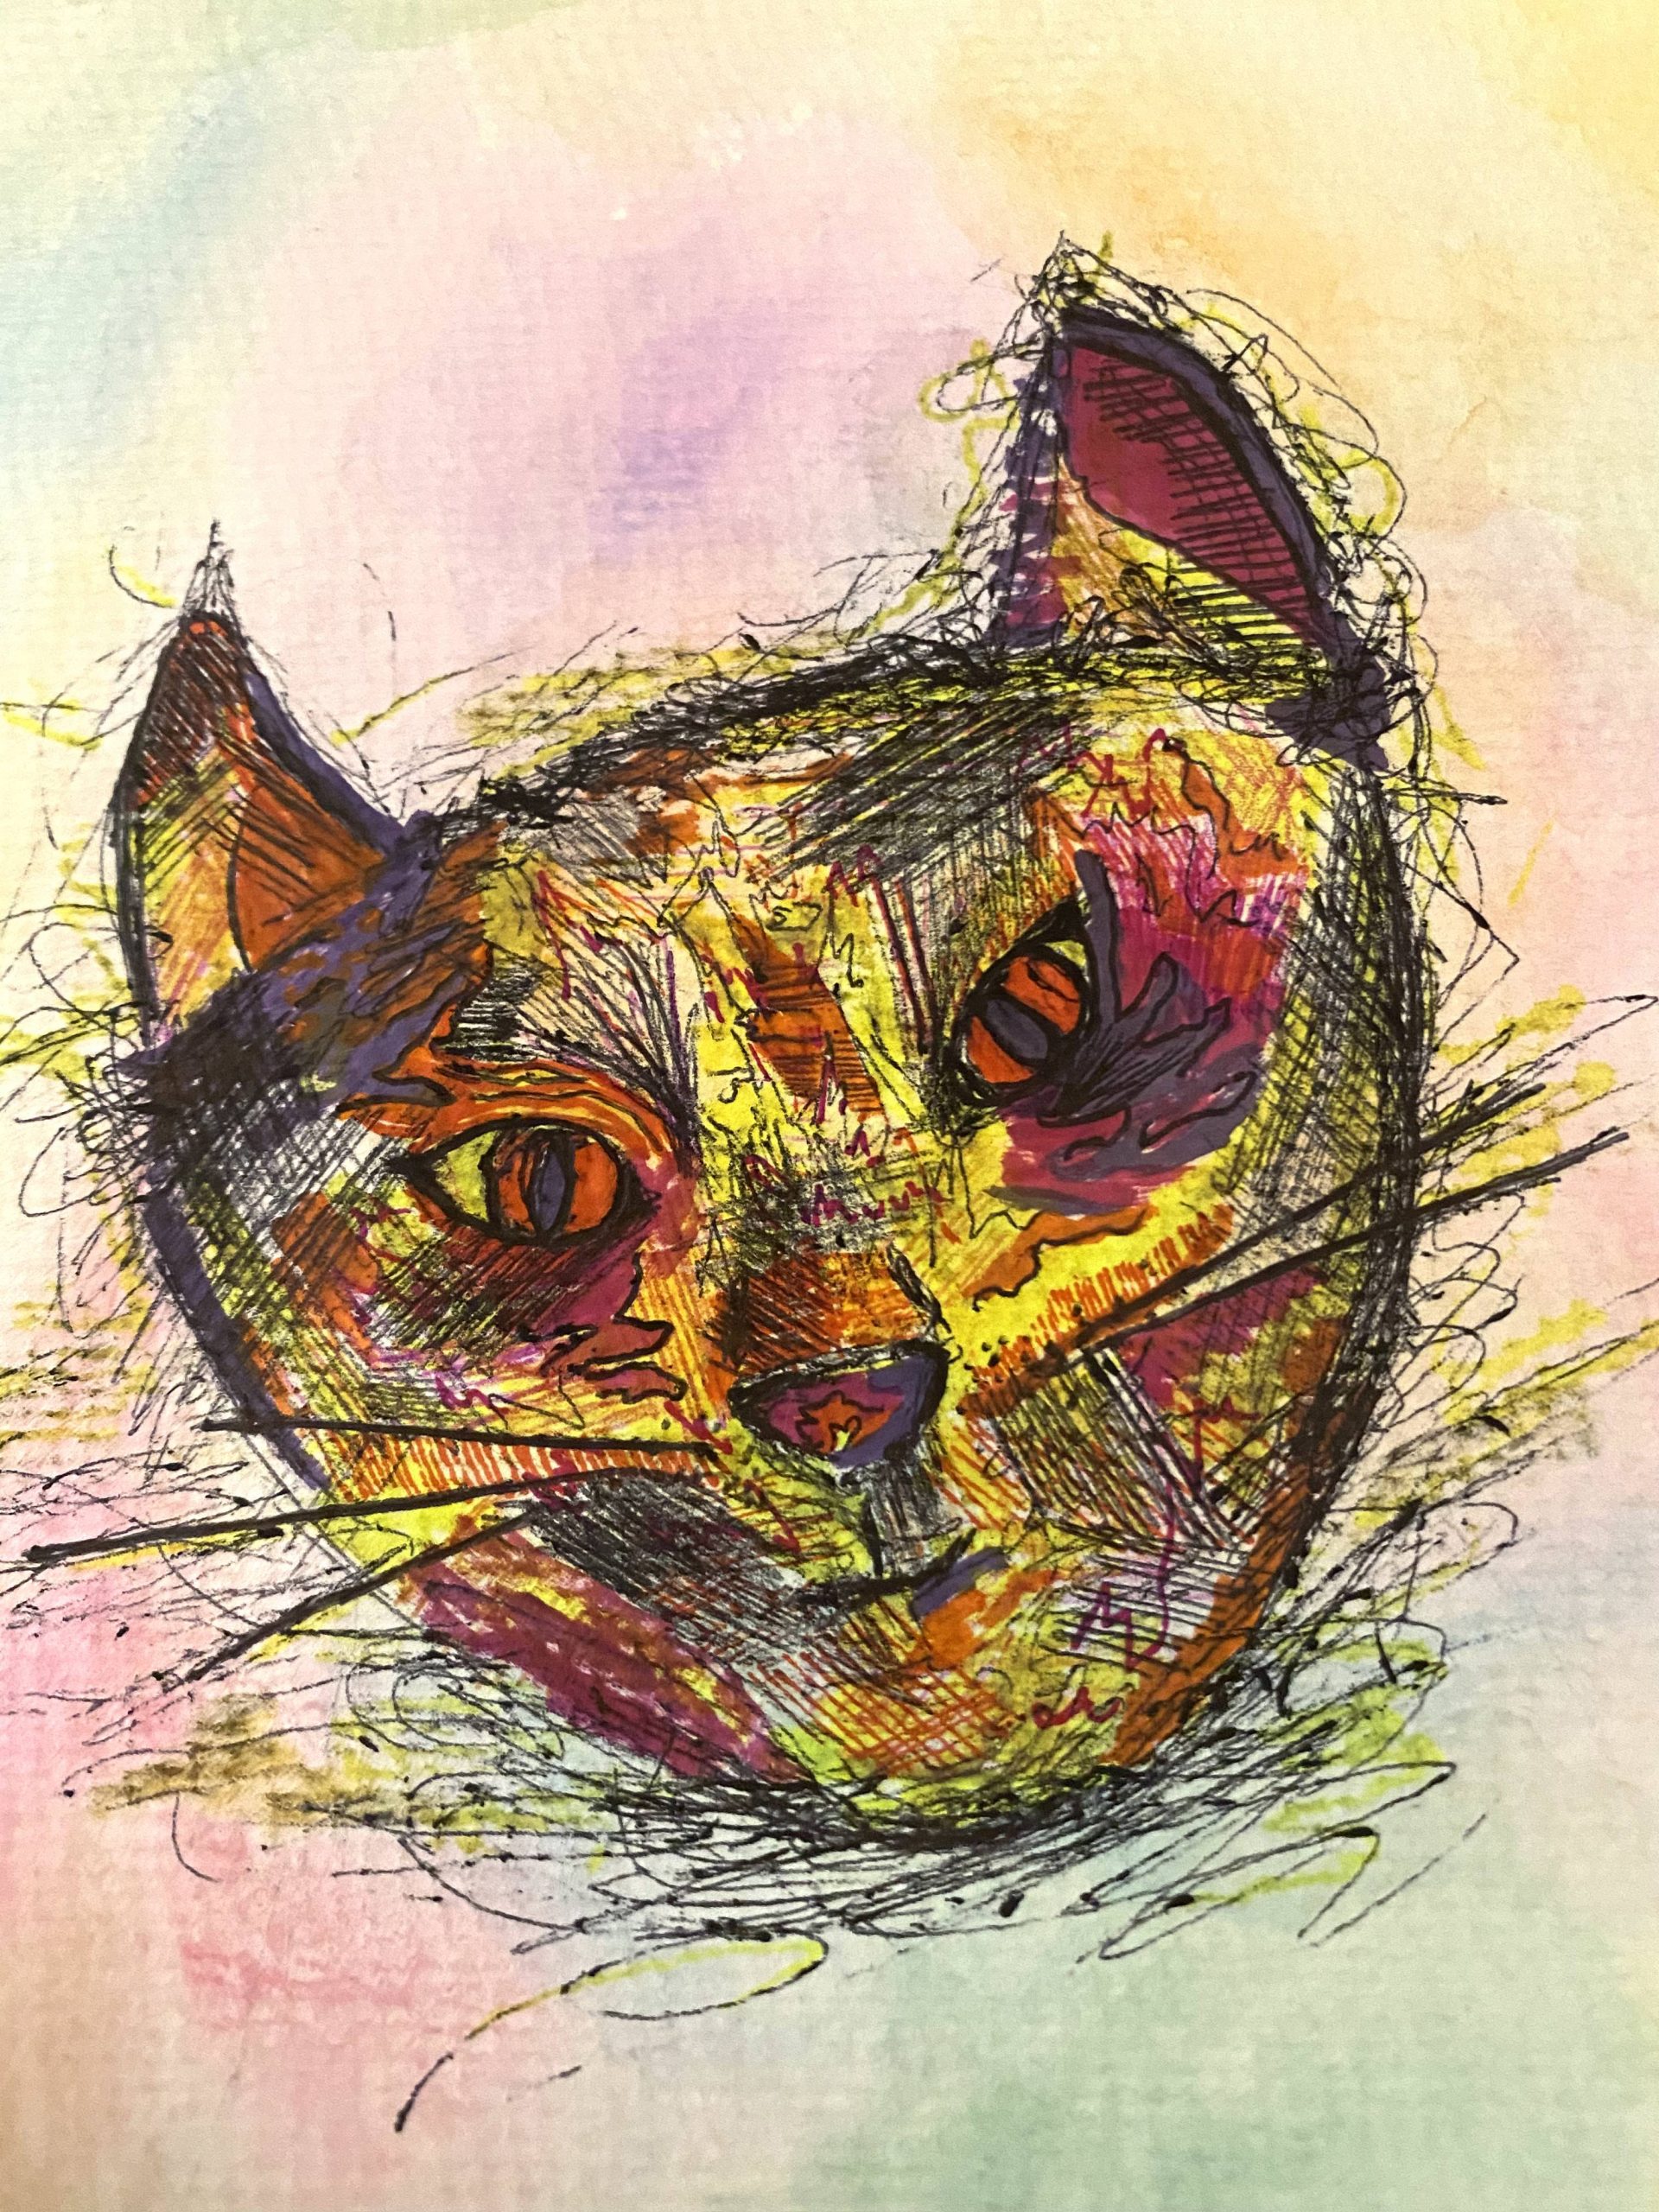 The colorful face of a cat floats slanted in the middle of a pastel yellow, green, and pink background. Its eyes are slanted cartoonishly, implying anger or nefarious activity. Its long black whiskers and other black etchings in the face balance out the heavily contoured face, which is shaded bright yellow, red, magenta, and purple.